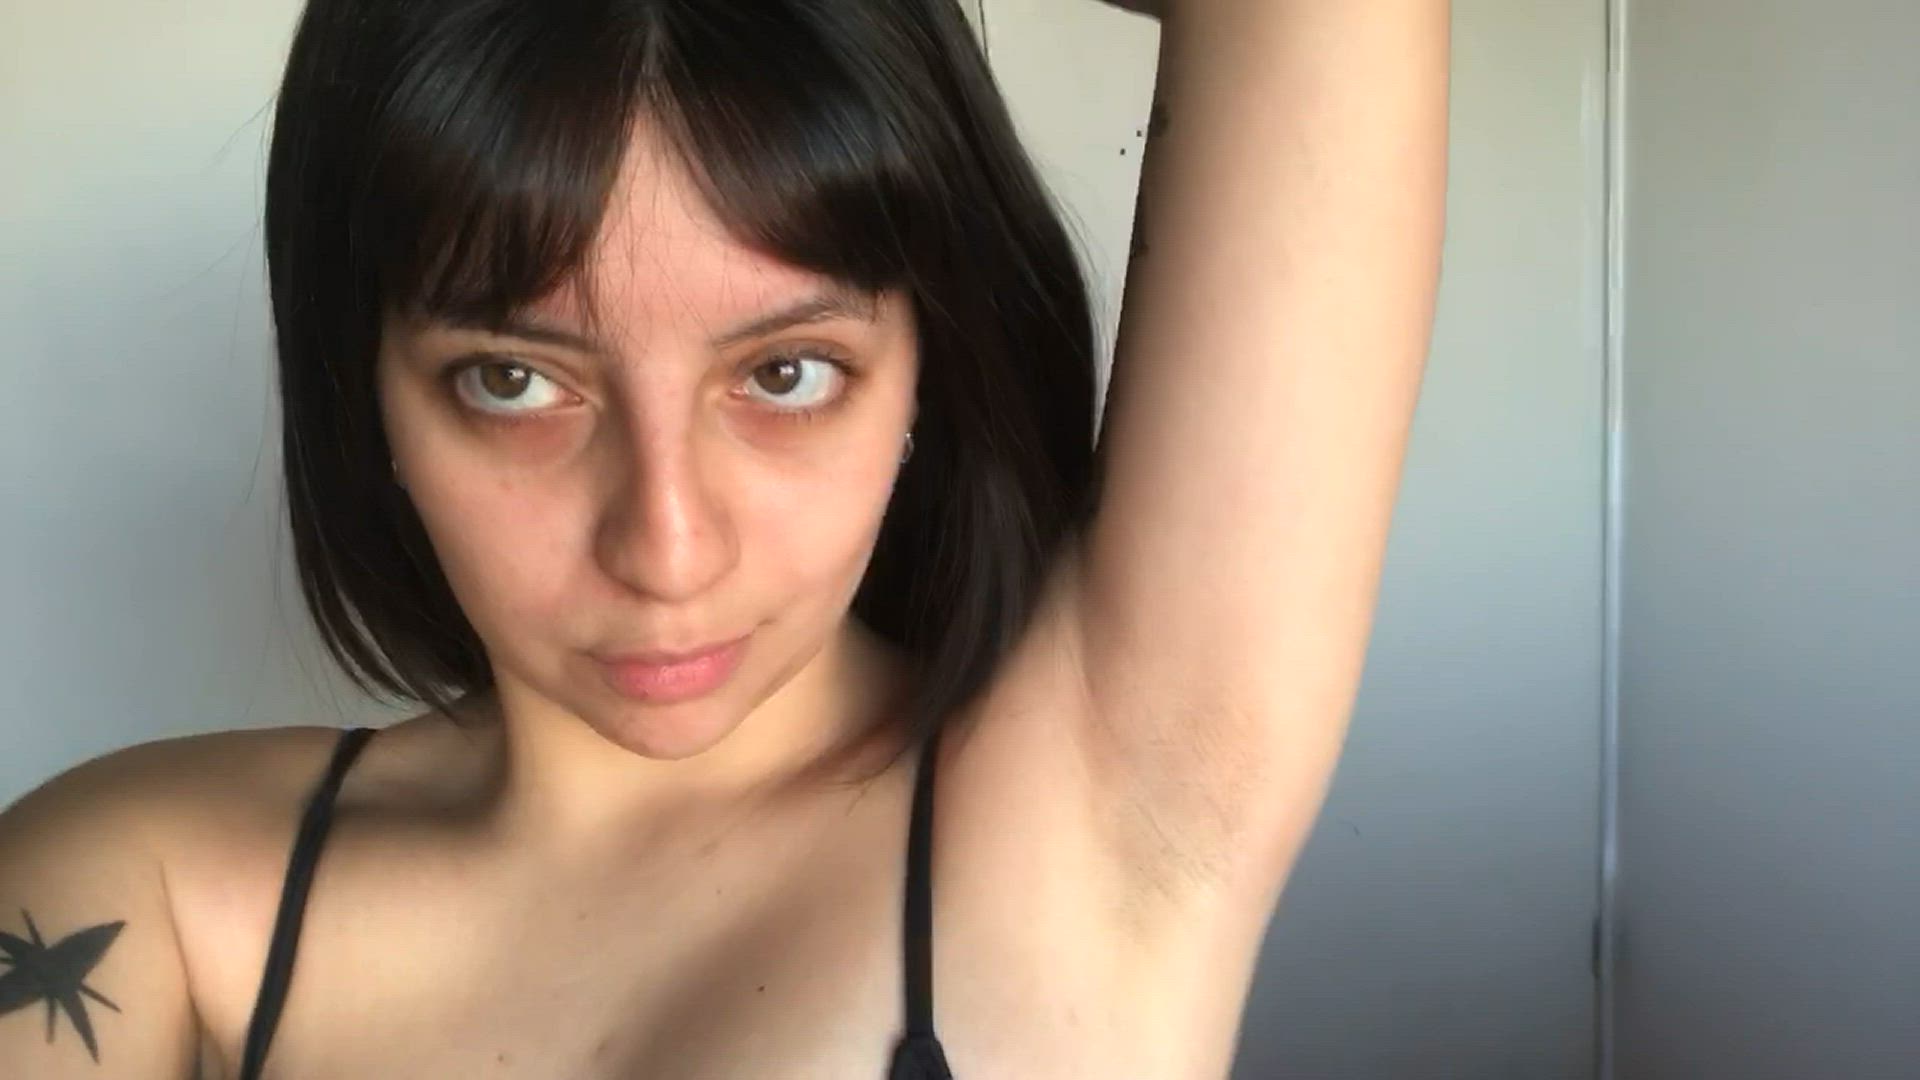 Armpit porn video with onlyfans model venusazoraa <strong>@miaazora</strong>